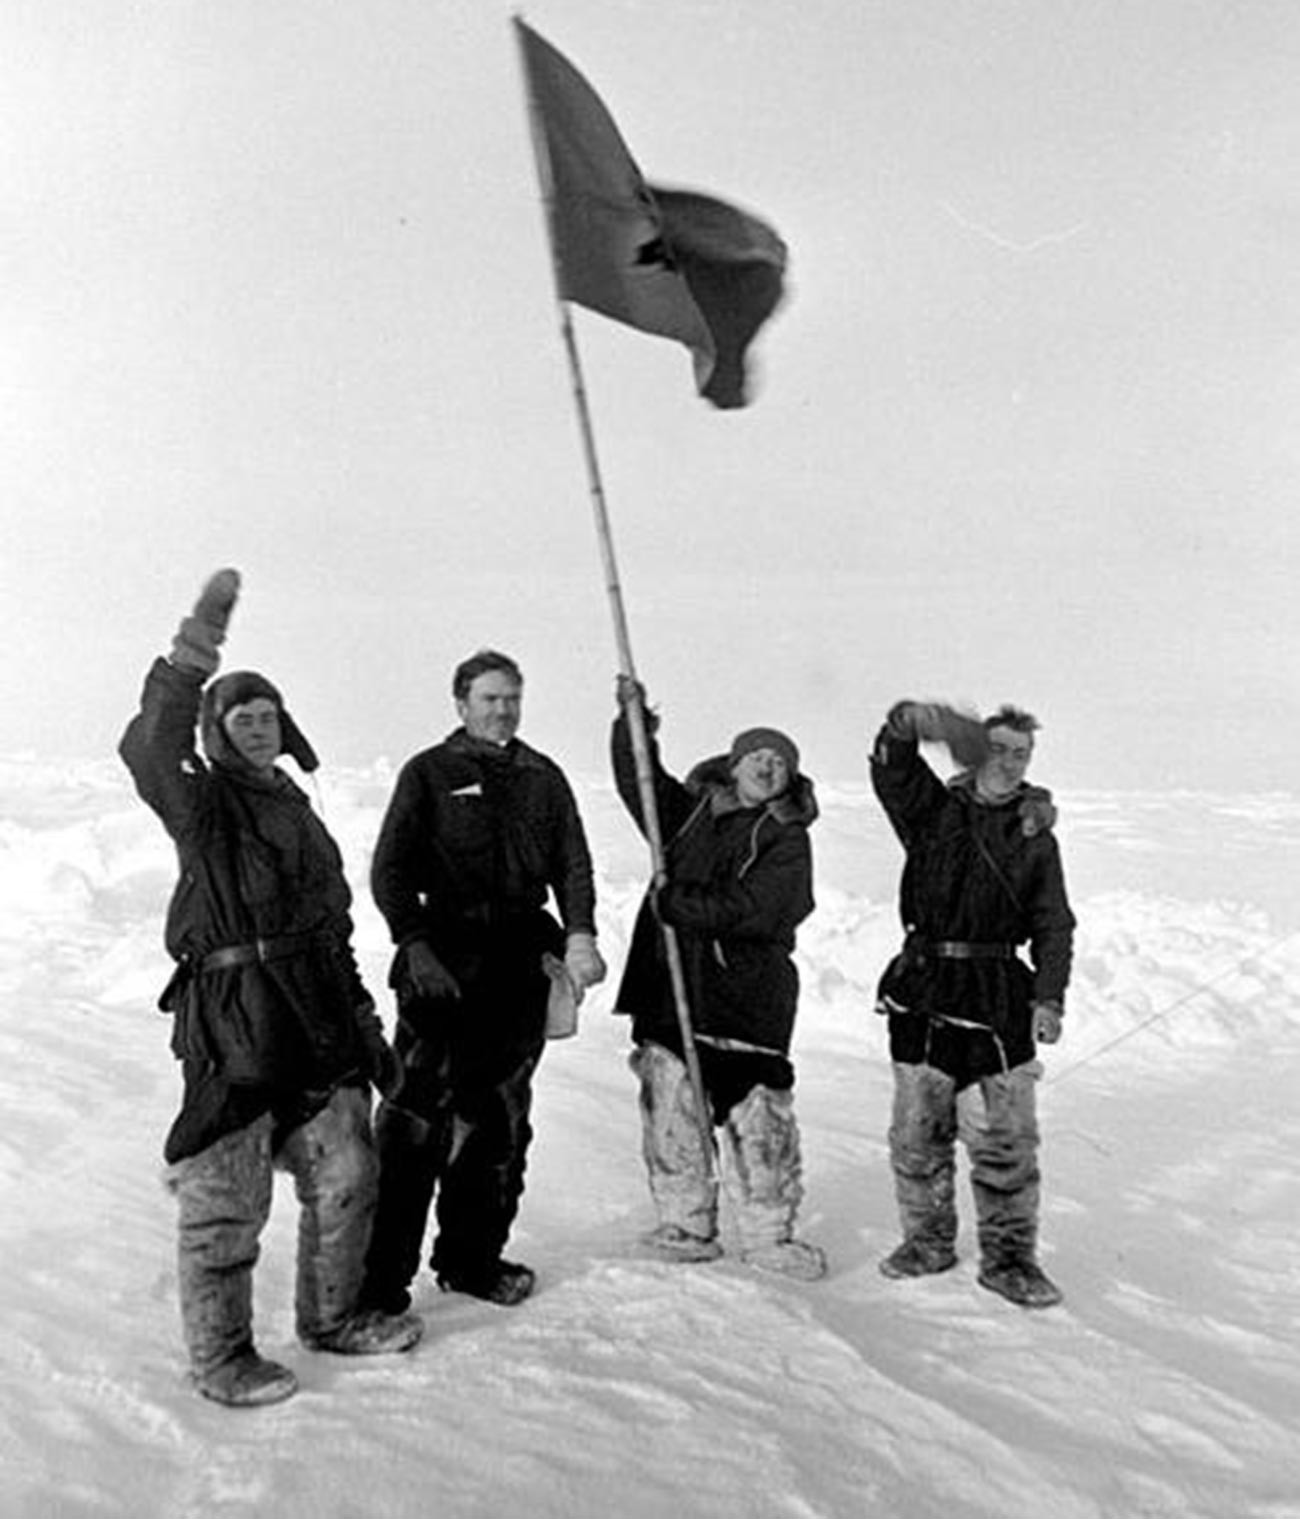 North Pole -1 expedition members at the North Pole